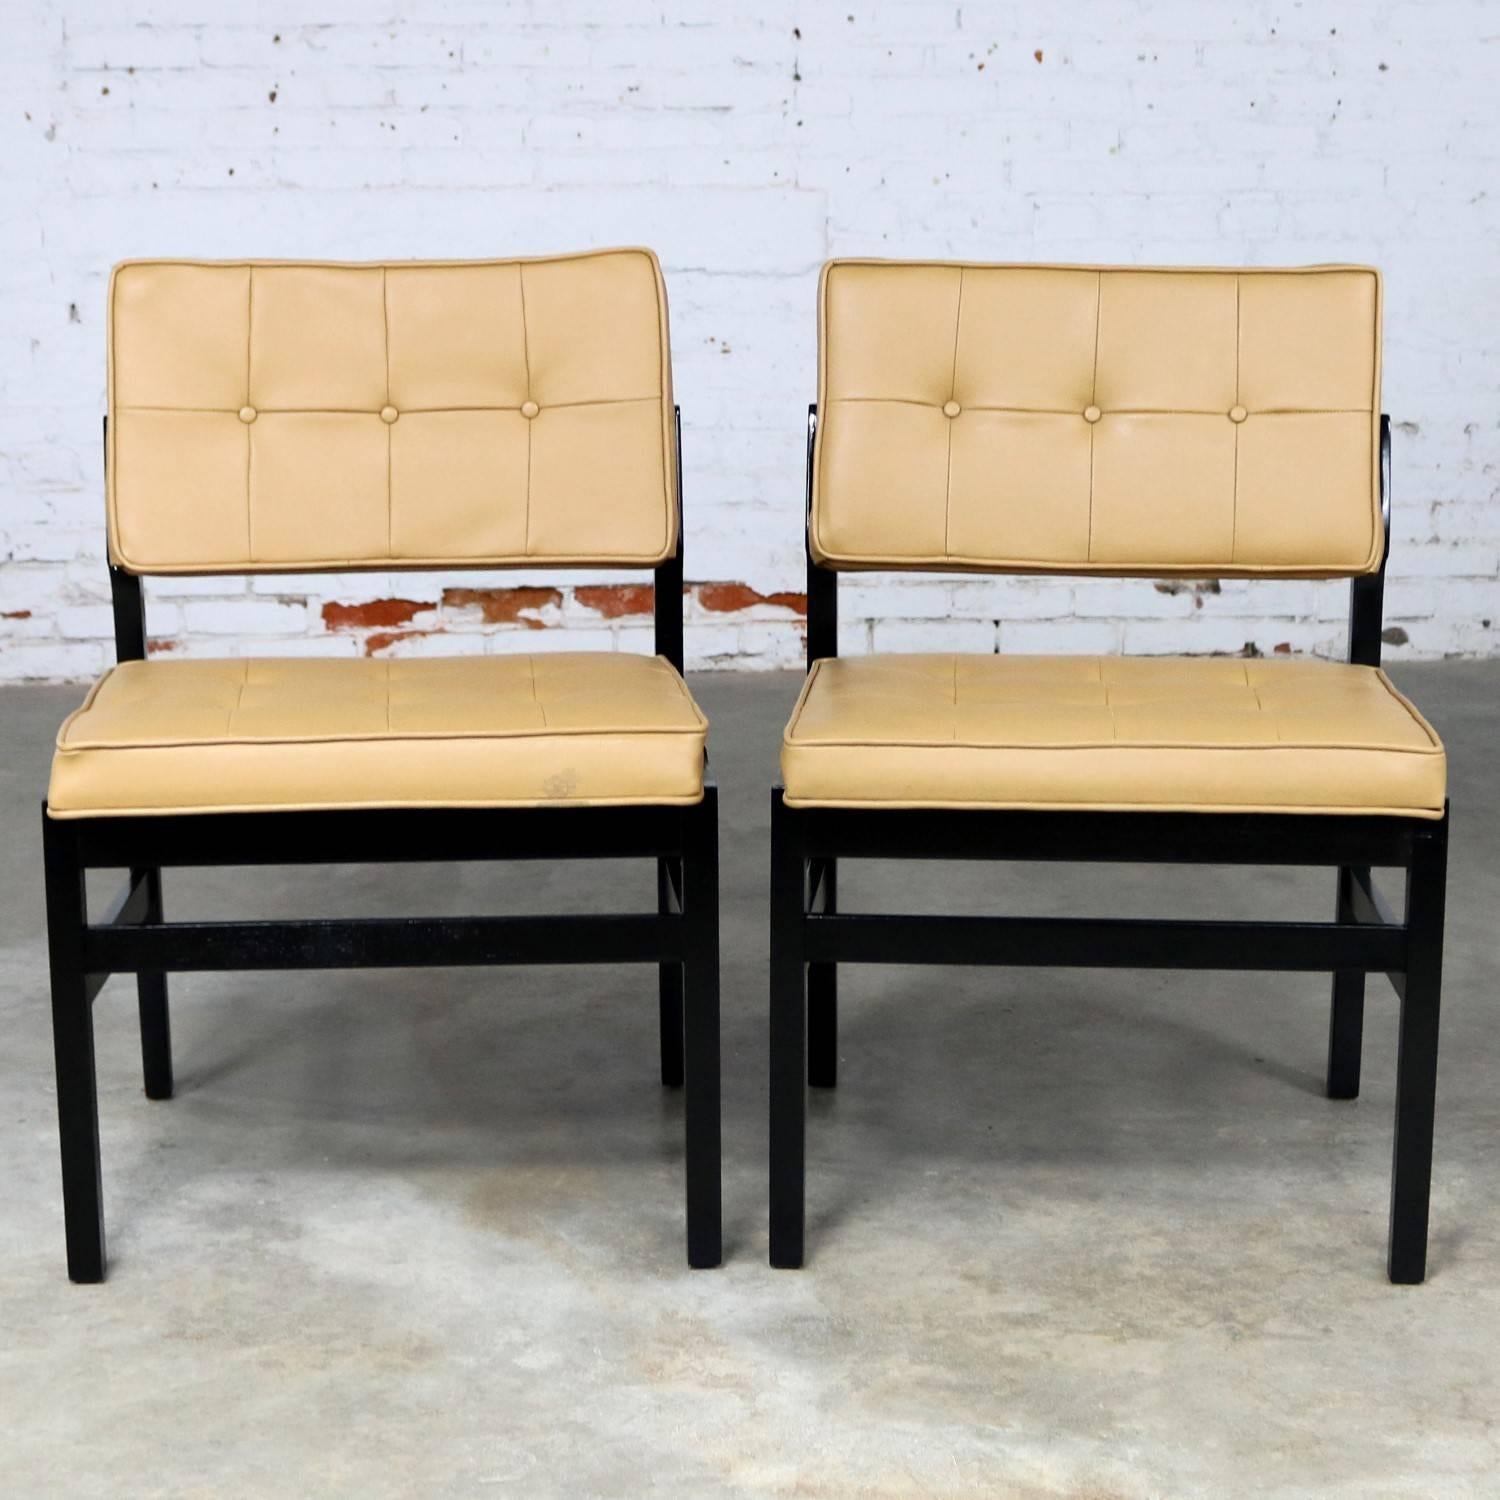 Handsome pair of Hibriten Chair Co. side chairs. Their great geometric wooden frames have been blackened with dye and they retain their original greenish gold faux leather upholstery and Hibriten tag. They are in wonderful vintage condition;